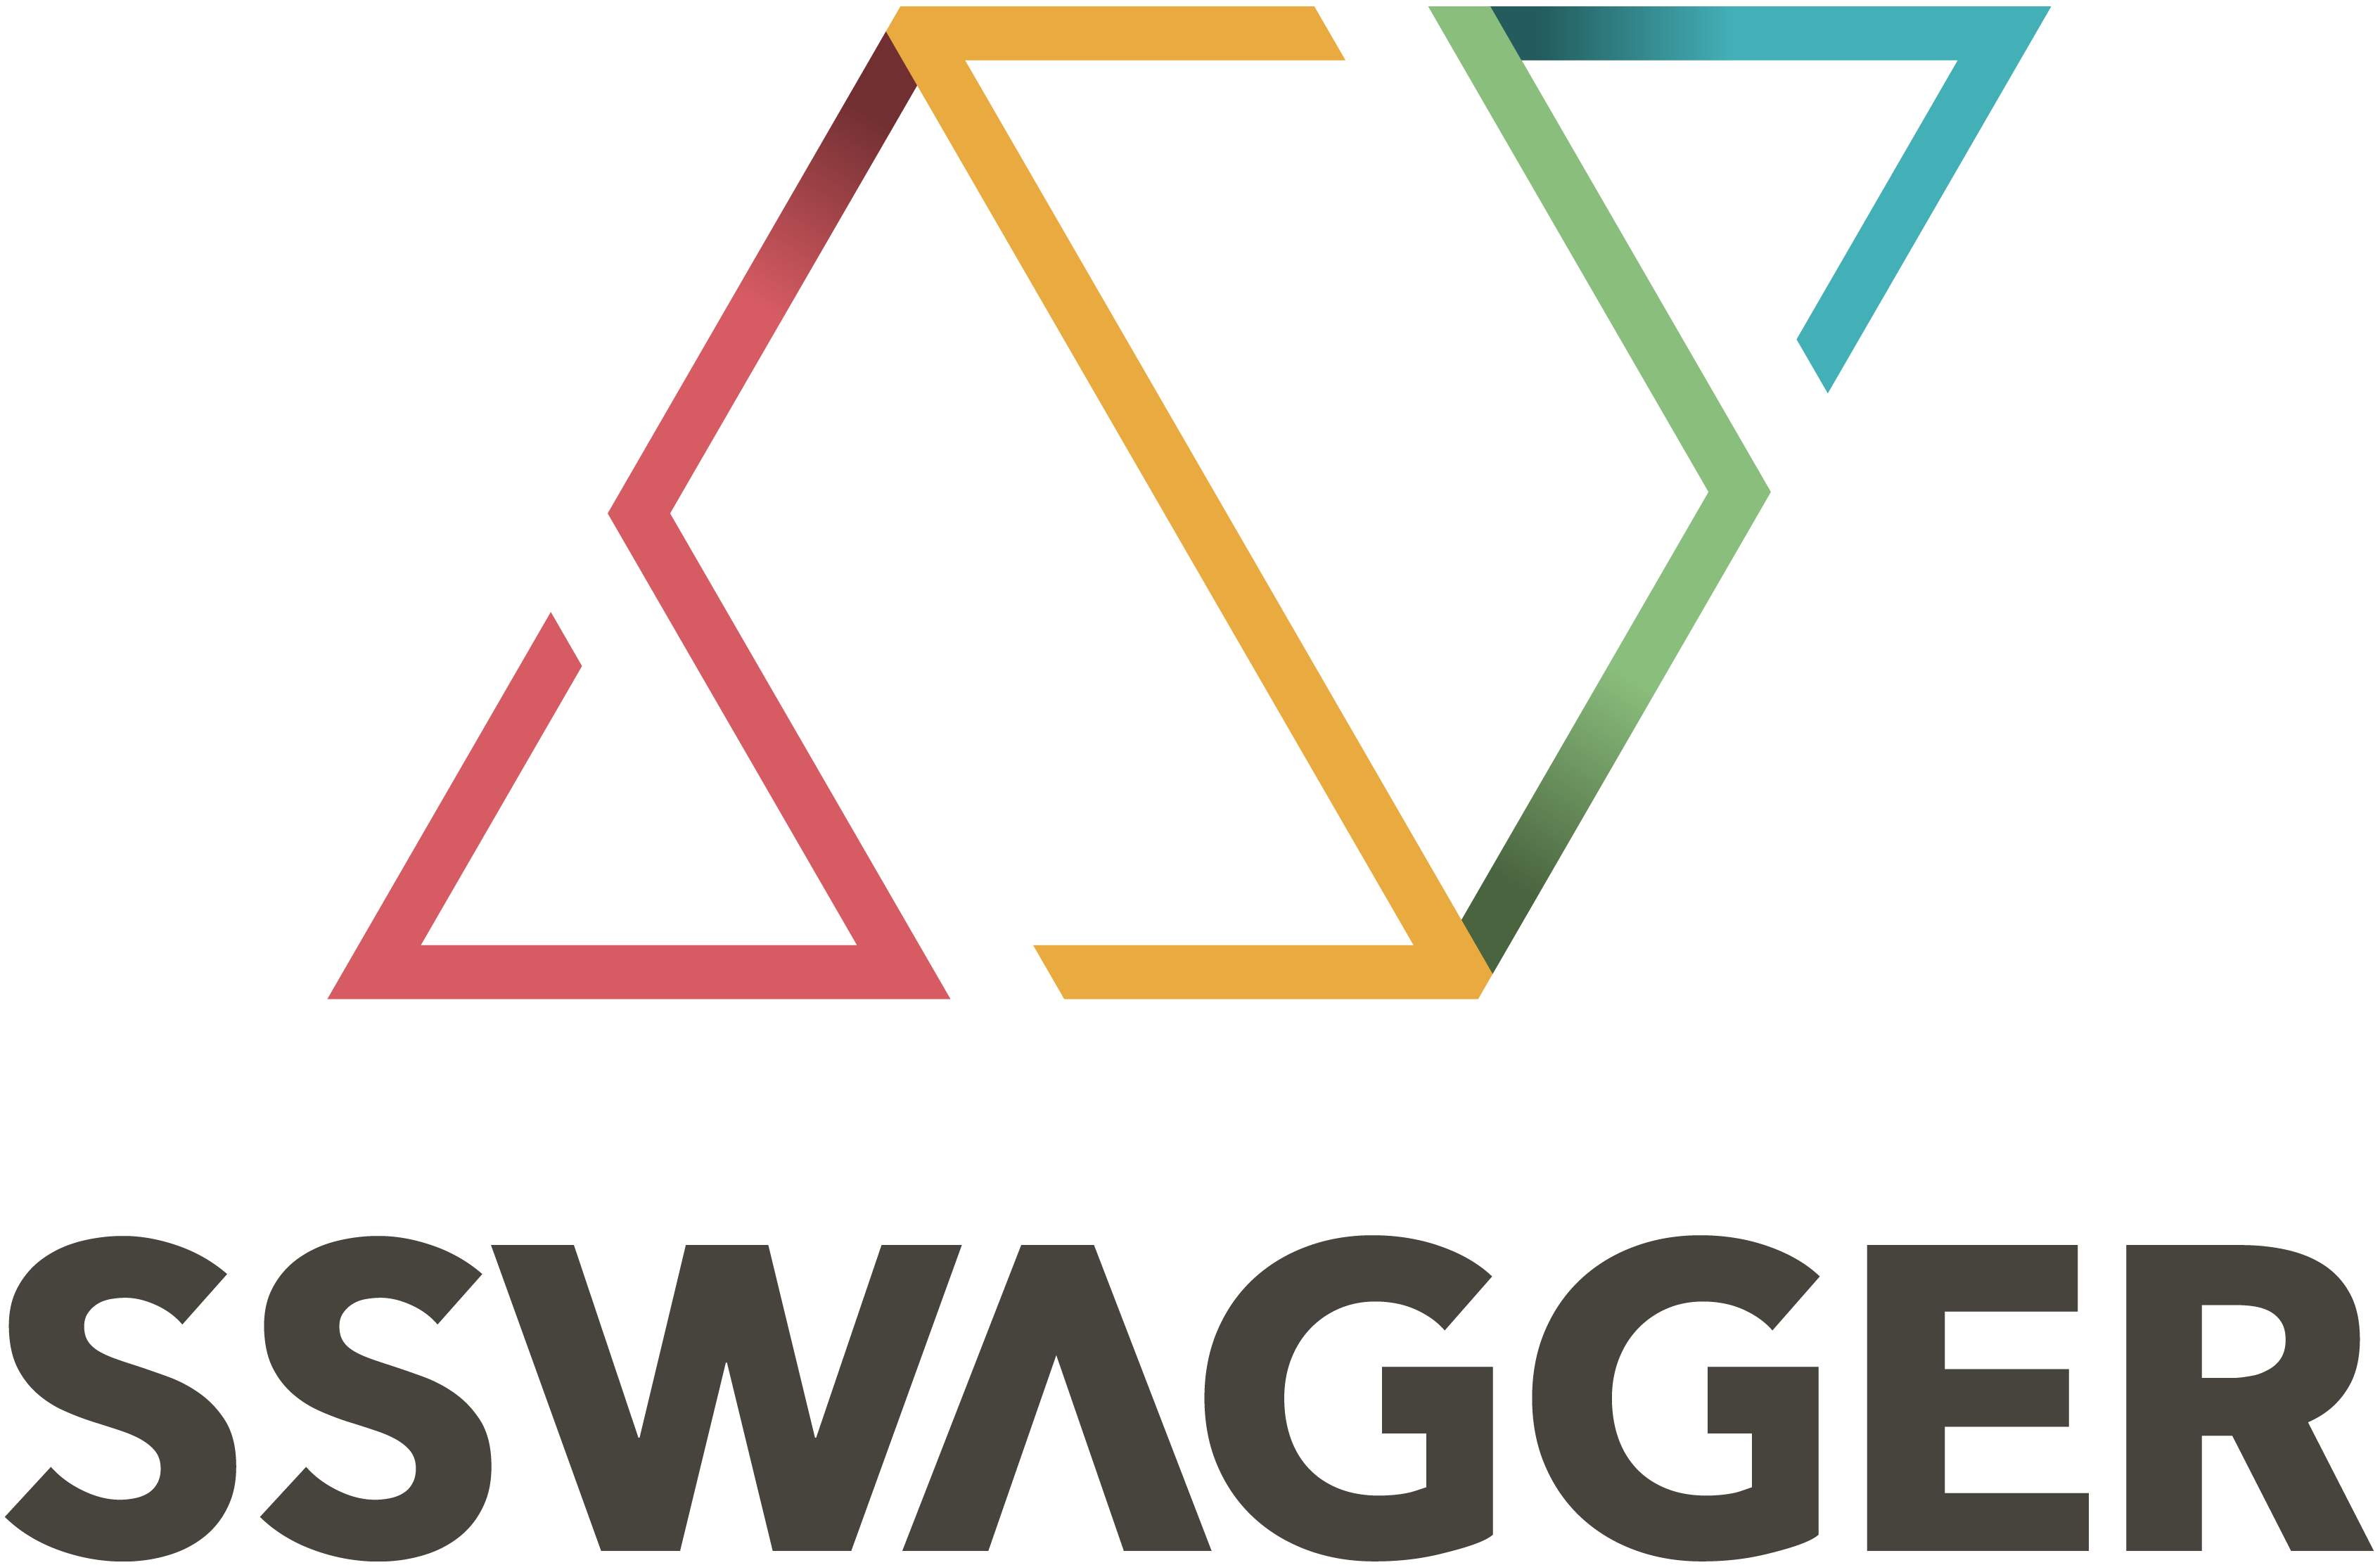 SSWAGGER-2